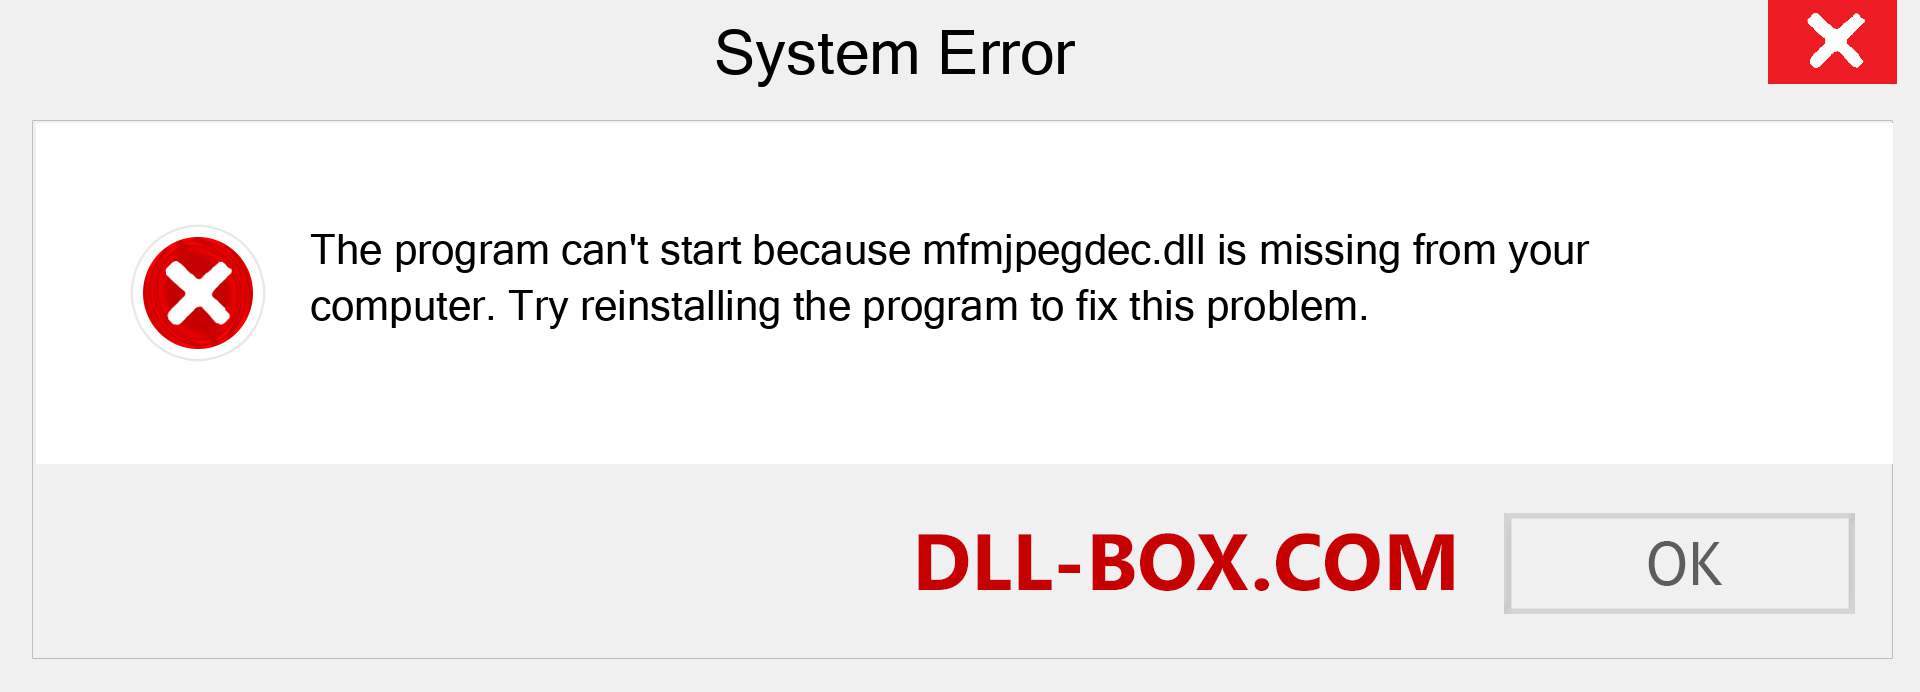  mfmjpegdec.dll file is missing?. Download for Windows 7, 8, 10 - Fix  mfmjpegdec dll Missing Error on Windows, photos, images